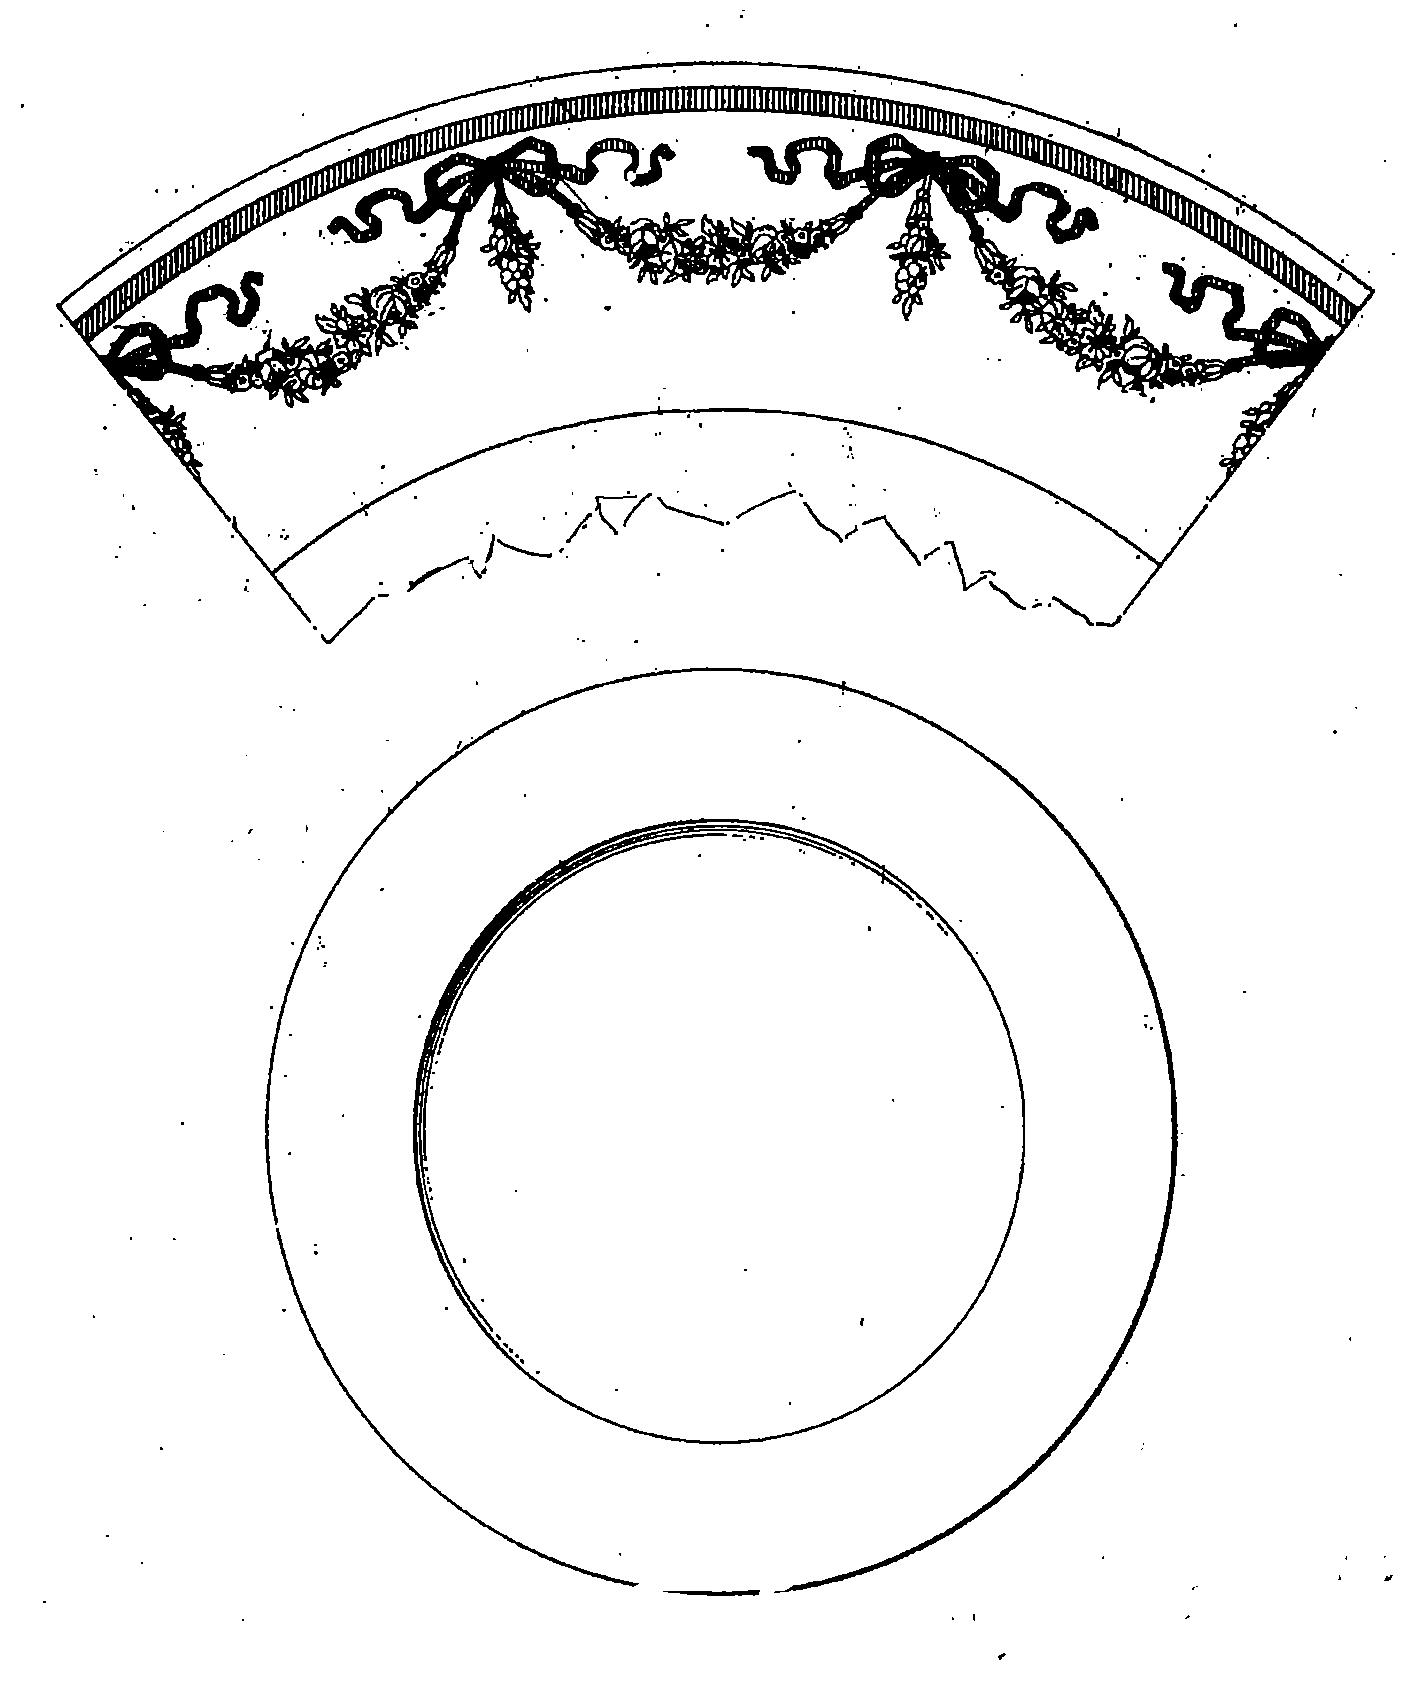 Example of a design for a food server with simulative ornamentationthat shows a ribbon or bow.
